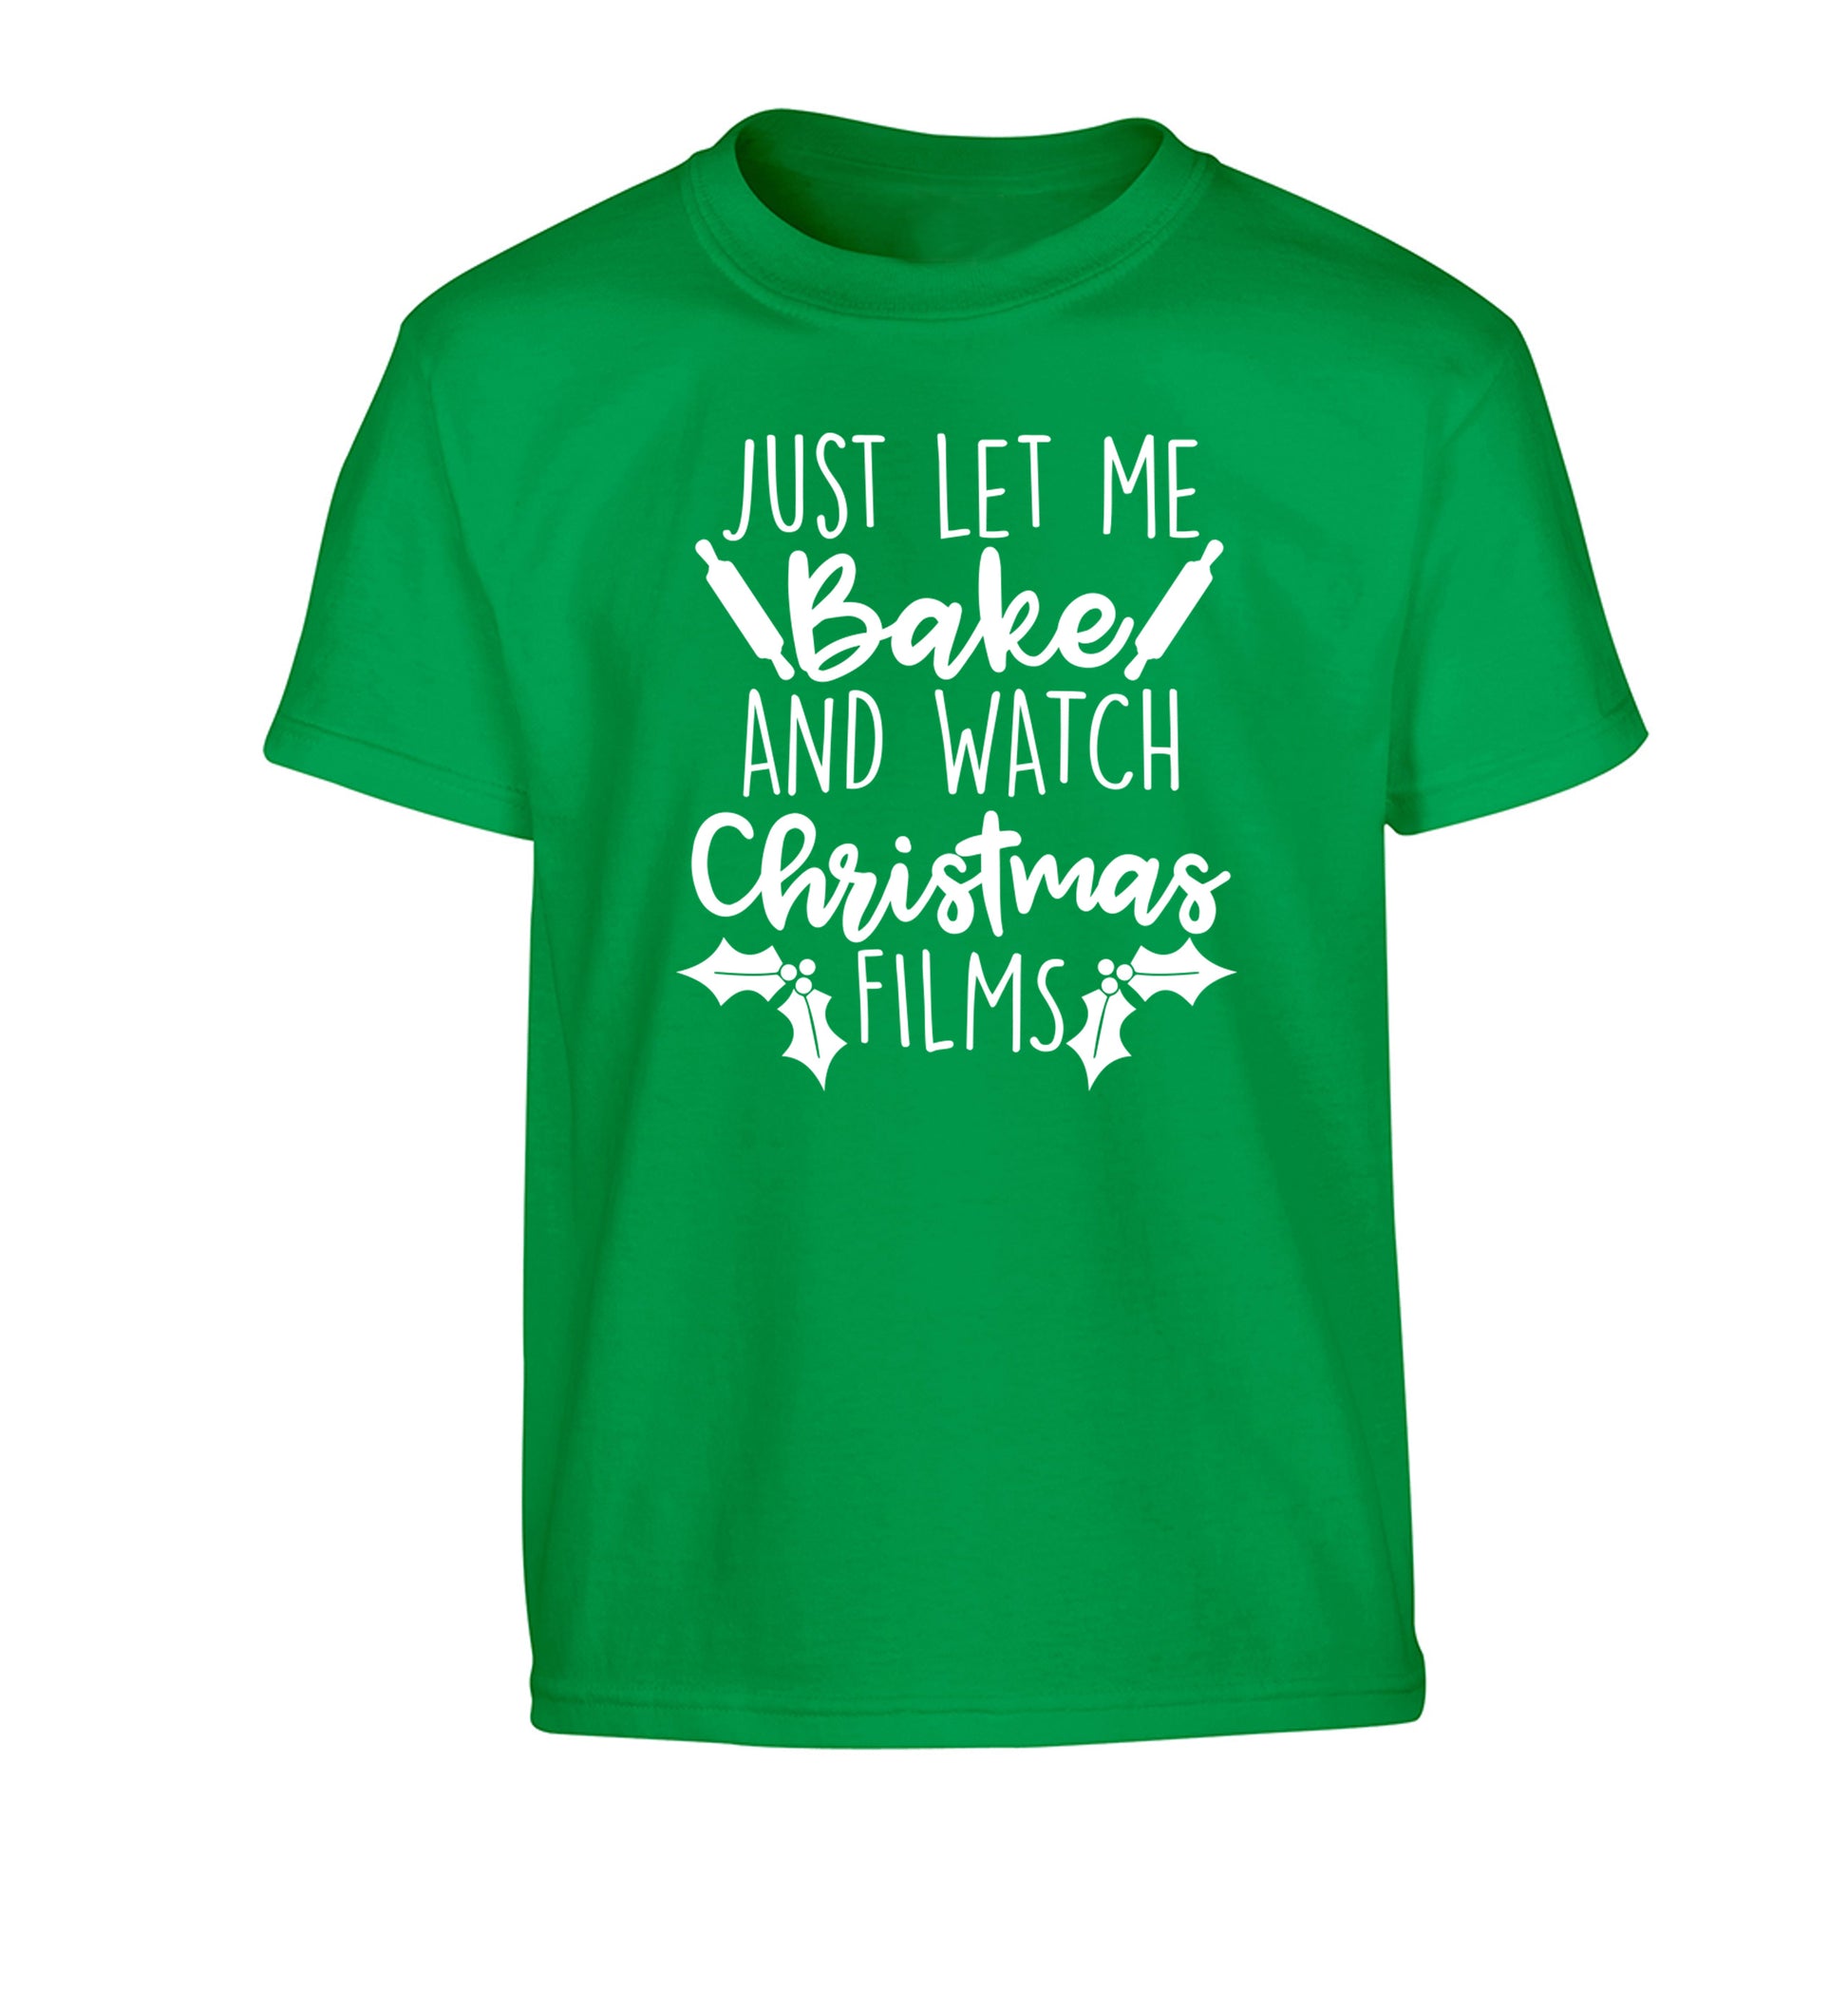 Just let me bake and watch Christmas films Children's green Tshirt 12-14 Years